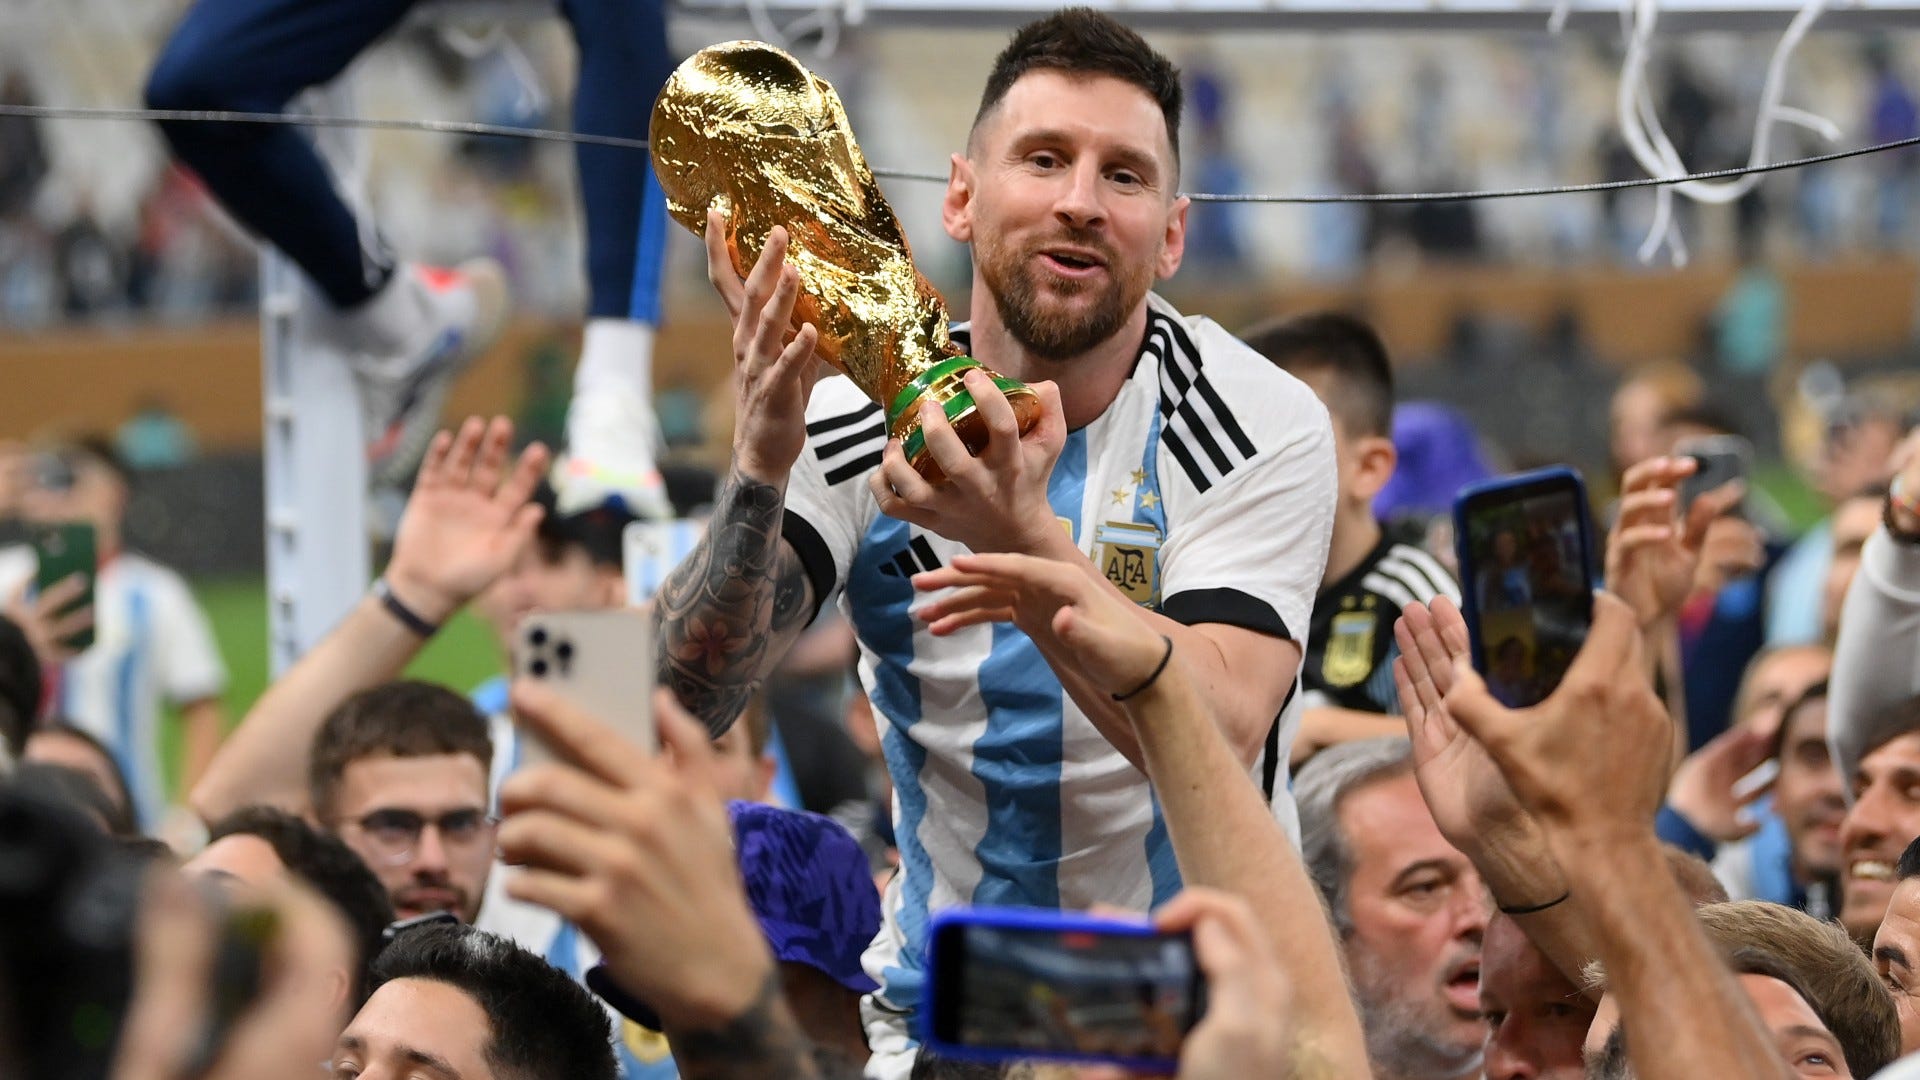 Lionel Messi's ex-Argentina team-mate Javier Pastore backs former club PSG's stance over non-celebration of World Cup win